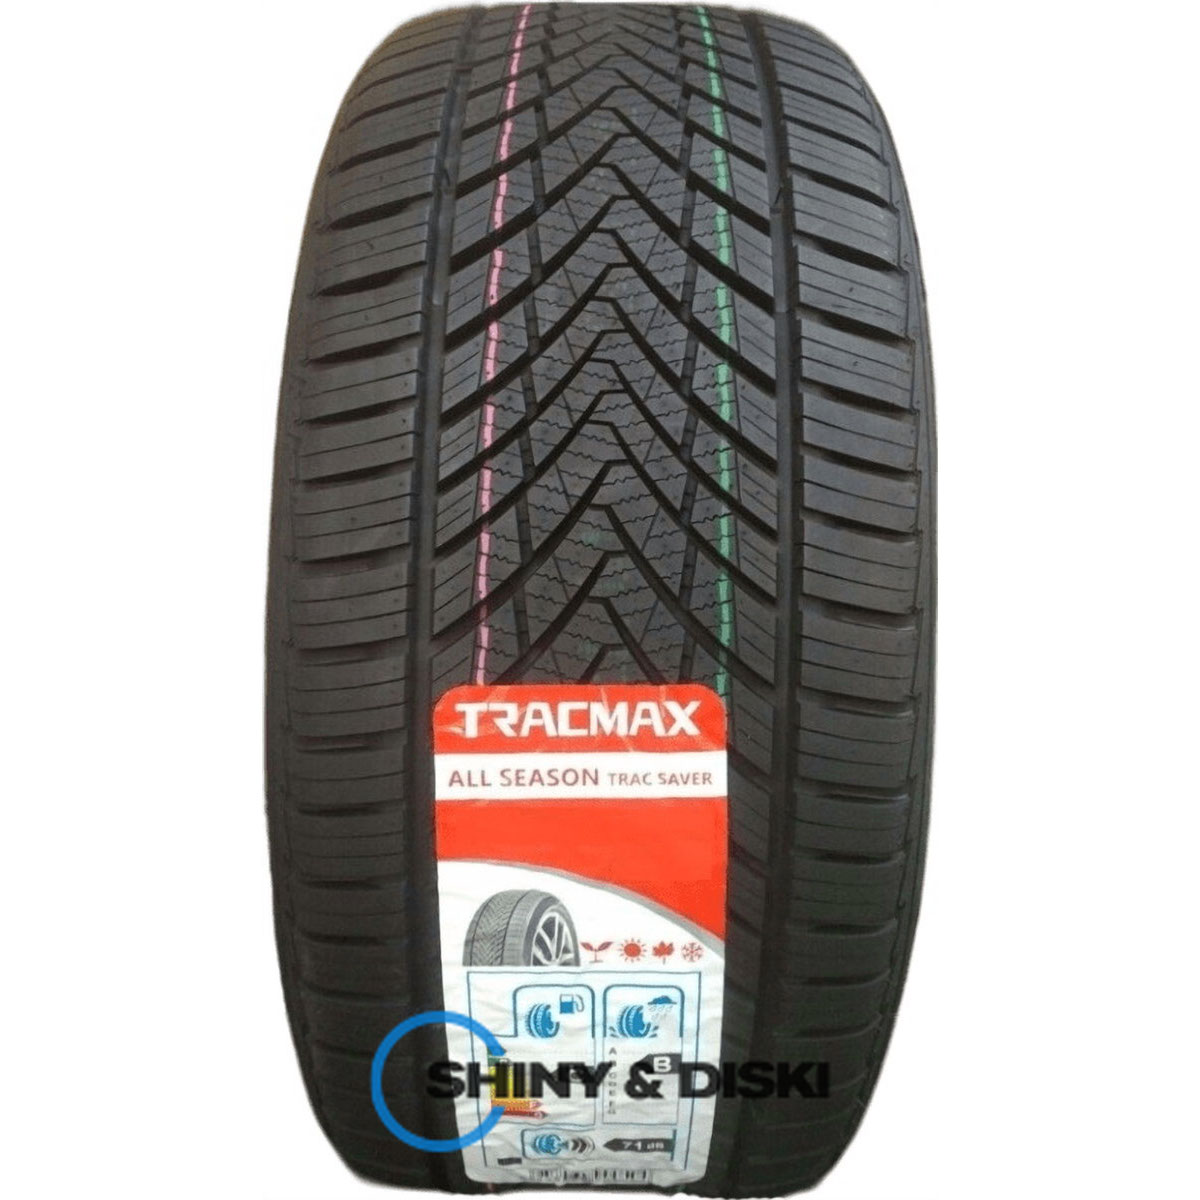 покрышки tracmax a/s trac saver 175/70 r13 82t